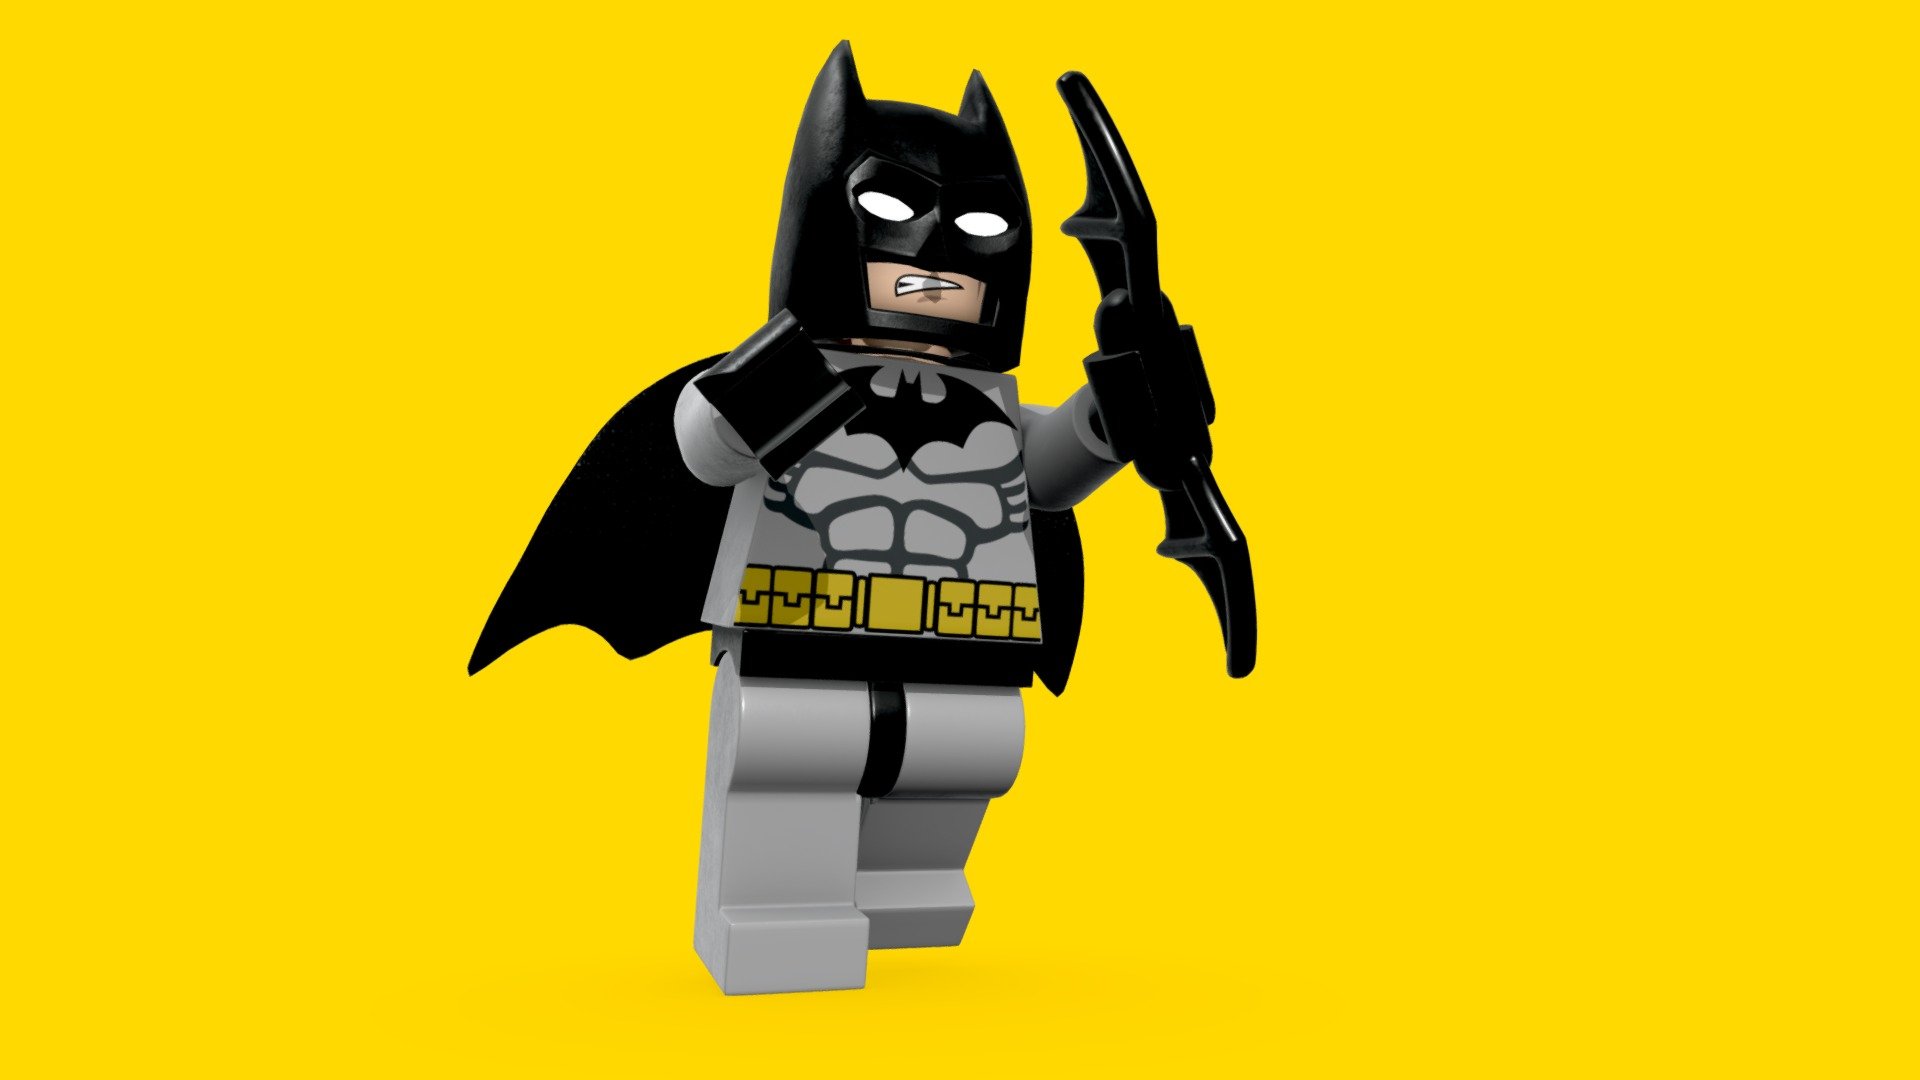 LEGO BATMAN

The file includes a 3D model and 4k PBR textures in png format, FBX and Obj files.

The model was created in 3ds mas 2021 with the render engine V-Ray 5.0

You can request a different format.

Textures

PBR textures 4096x4096 pixels

each material contains




BasicColor.

AO.

Roughness.

Normal.

Metalness.

Opacity.

Have a nice day! - LEGO BATMAN - Buy Royalty Free 3D model by hado (@hado3d) 3d model